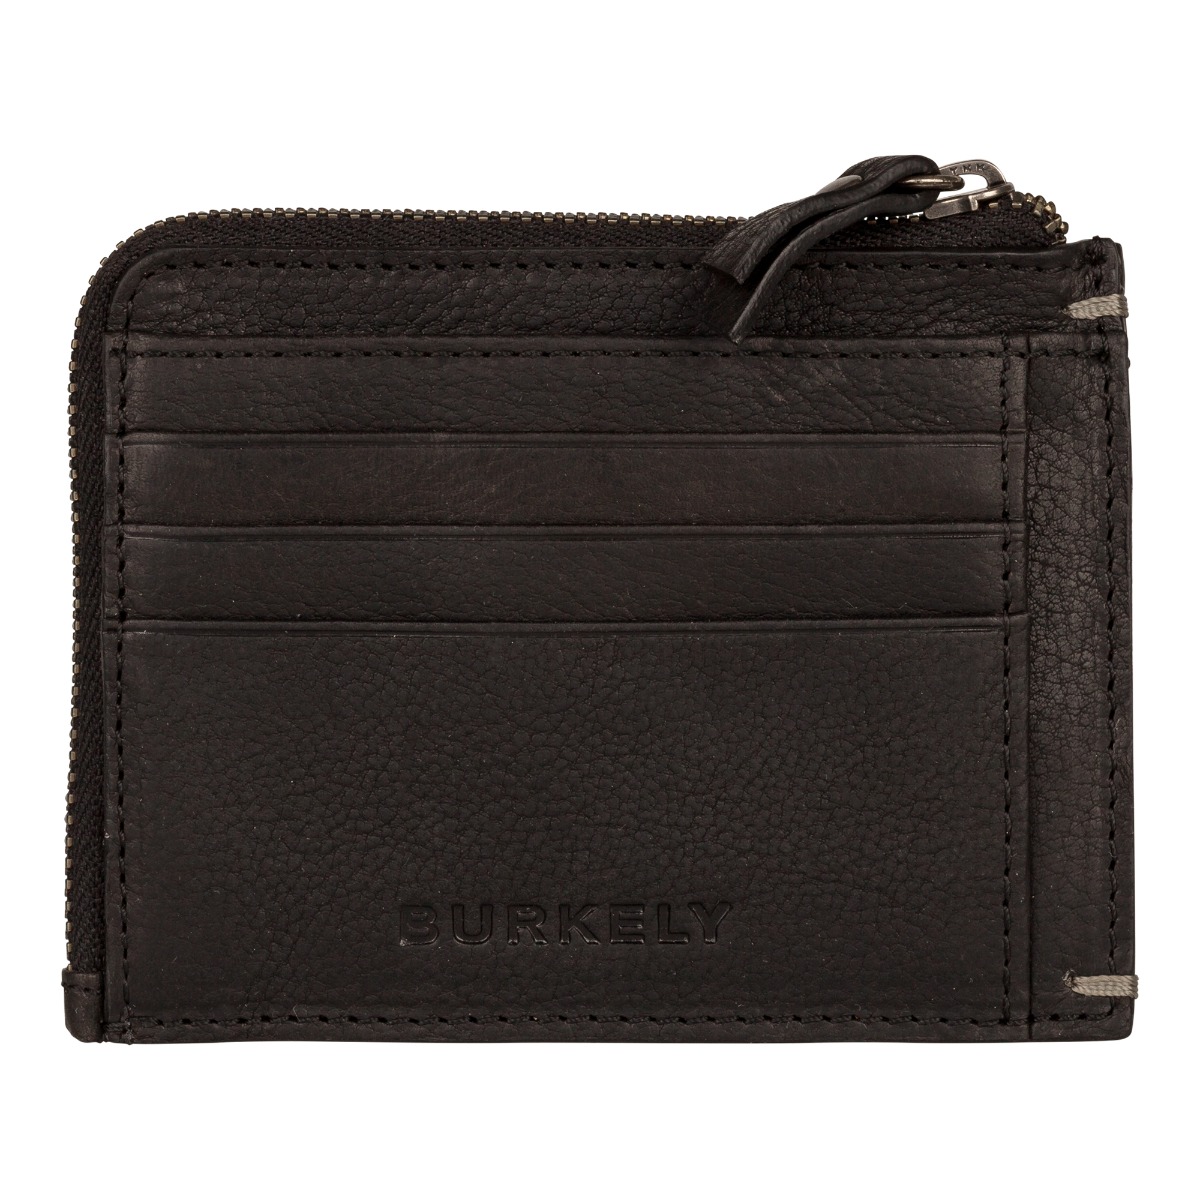 Burkely Antique Avery CC wallet Black